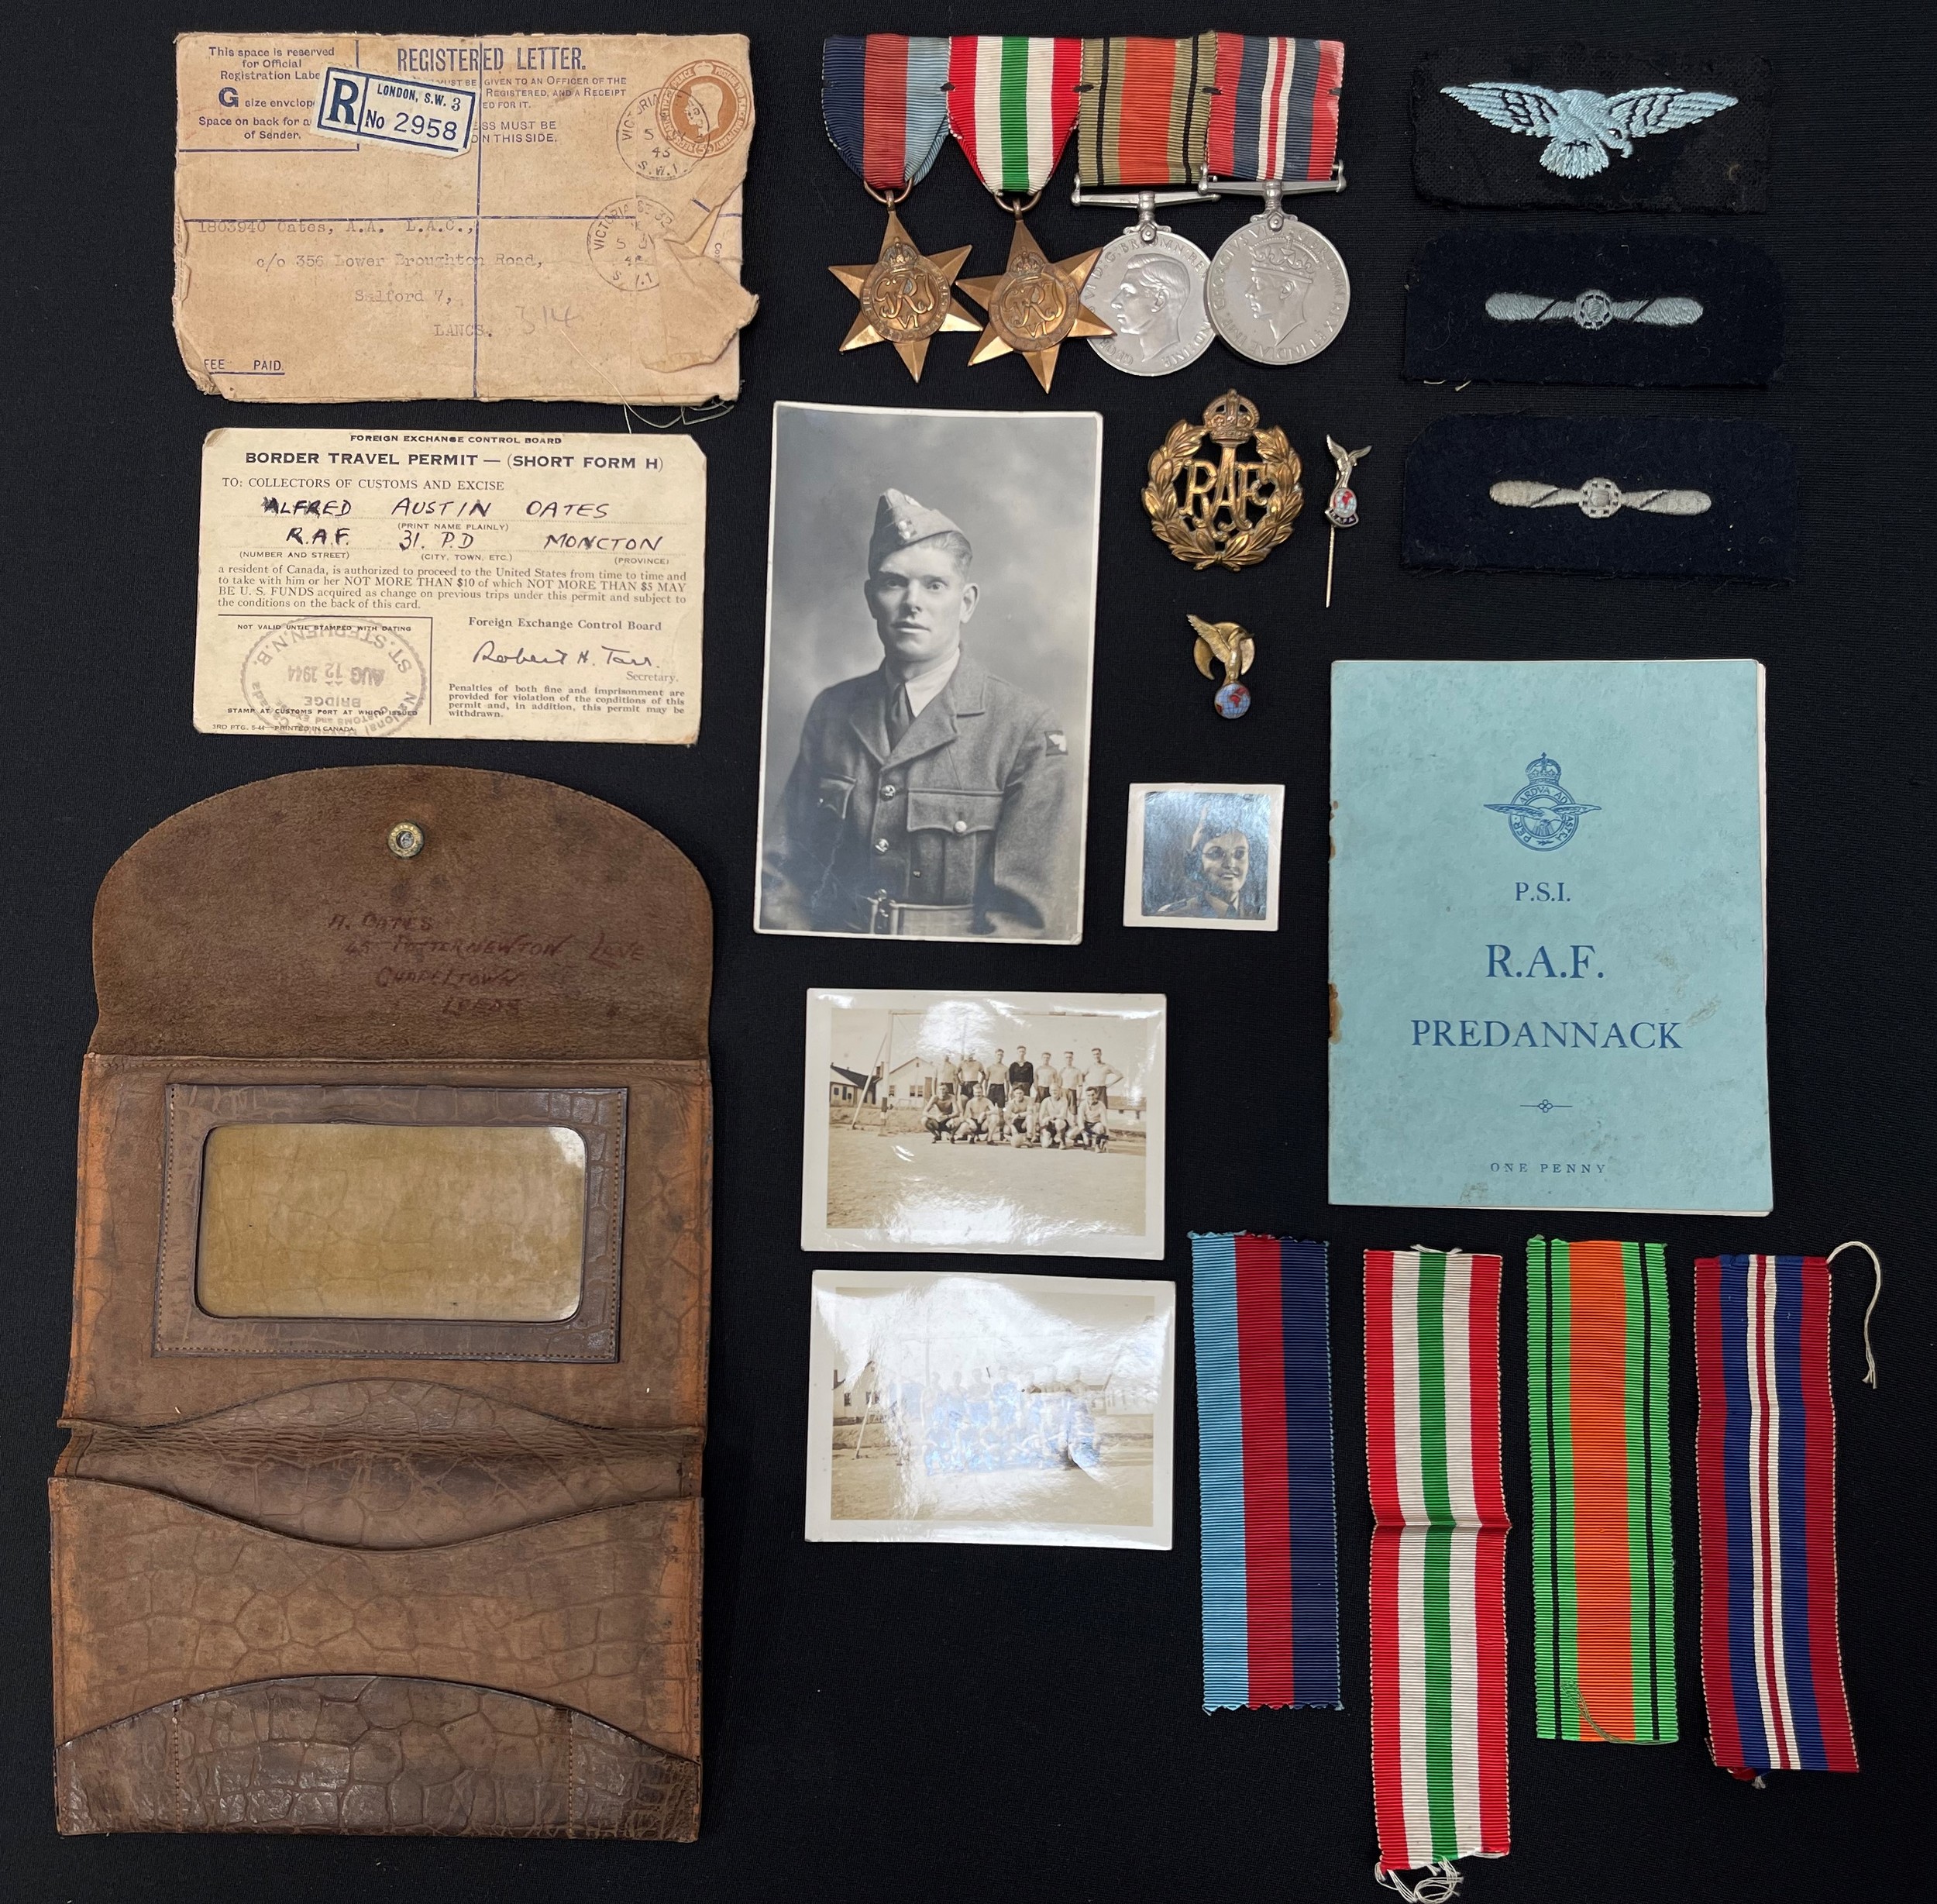 WW2 British RAF Medal Group to 1803940 LAC Alfred Austin Oates comprising of 1939-45 Star, Italy